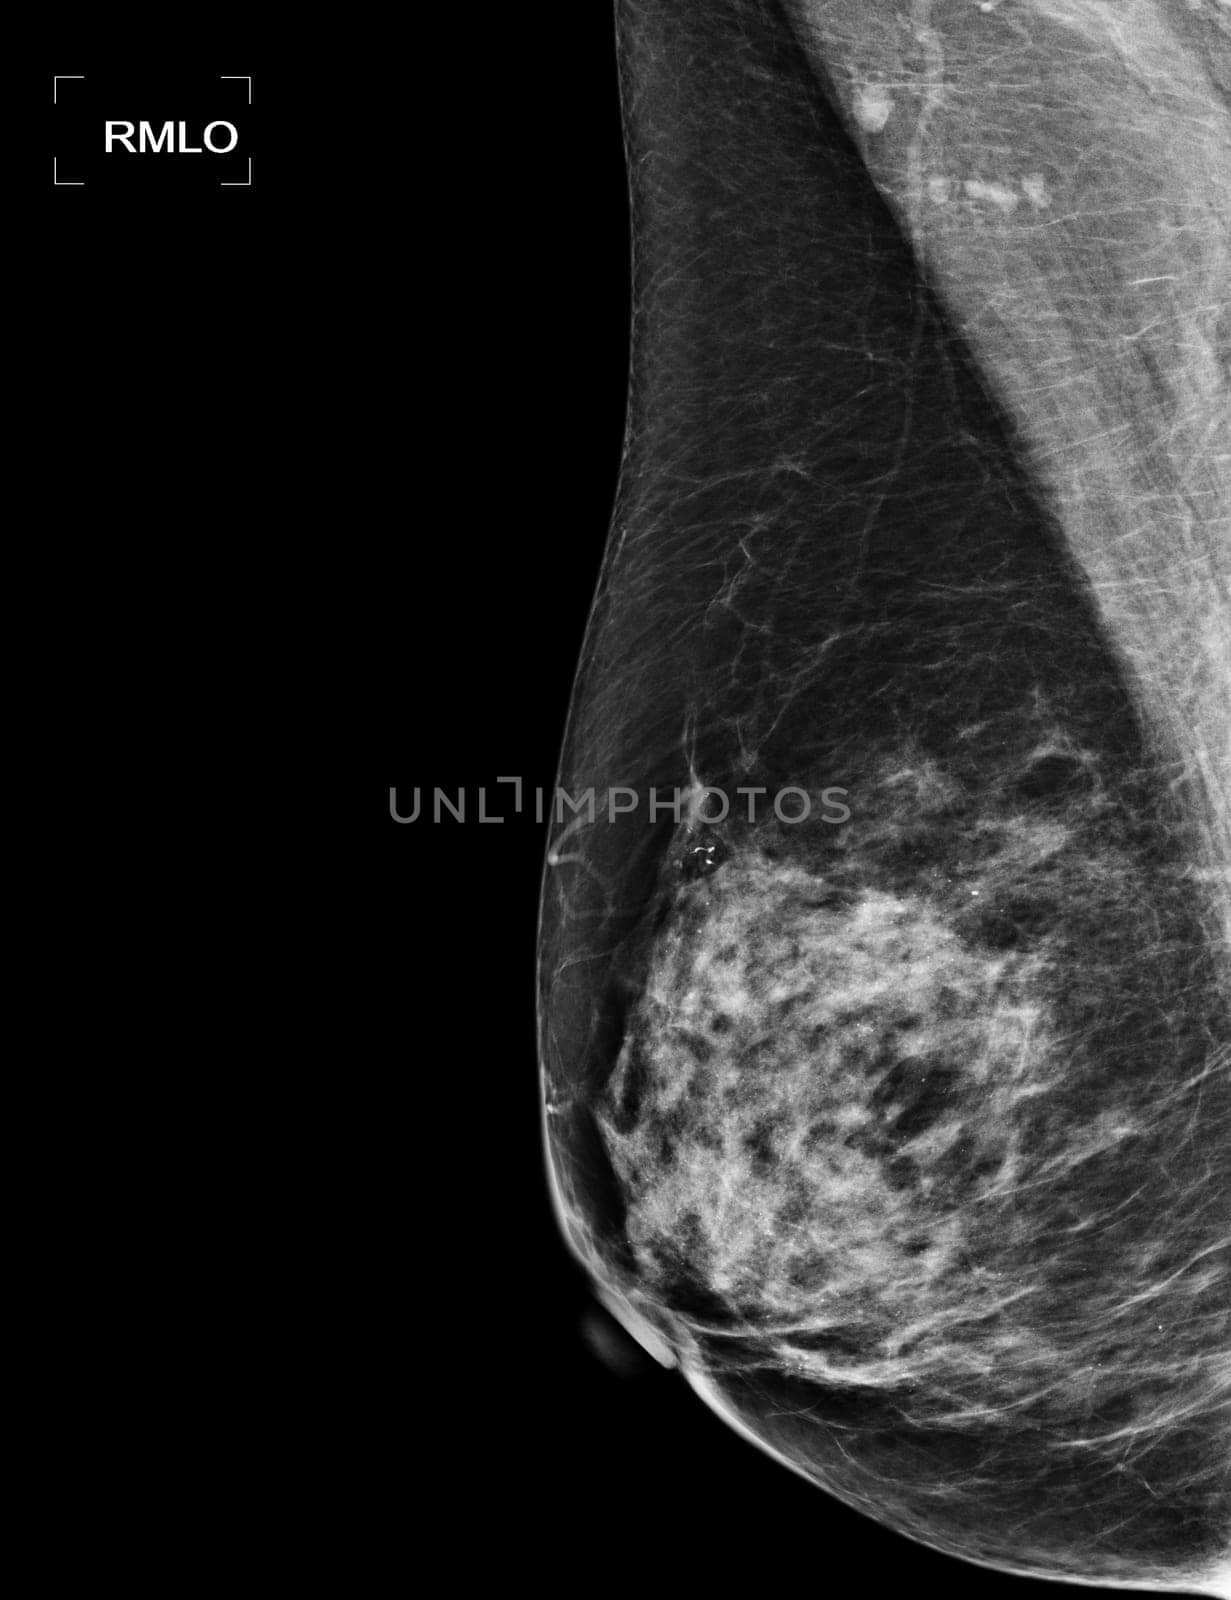 X-ray Digital Mammogram or mammography of both side breast showing benign tumor BI-RADS 2 should be checked once a year.